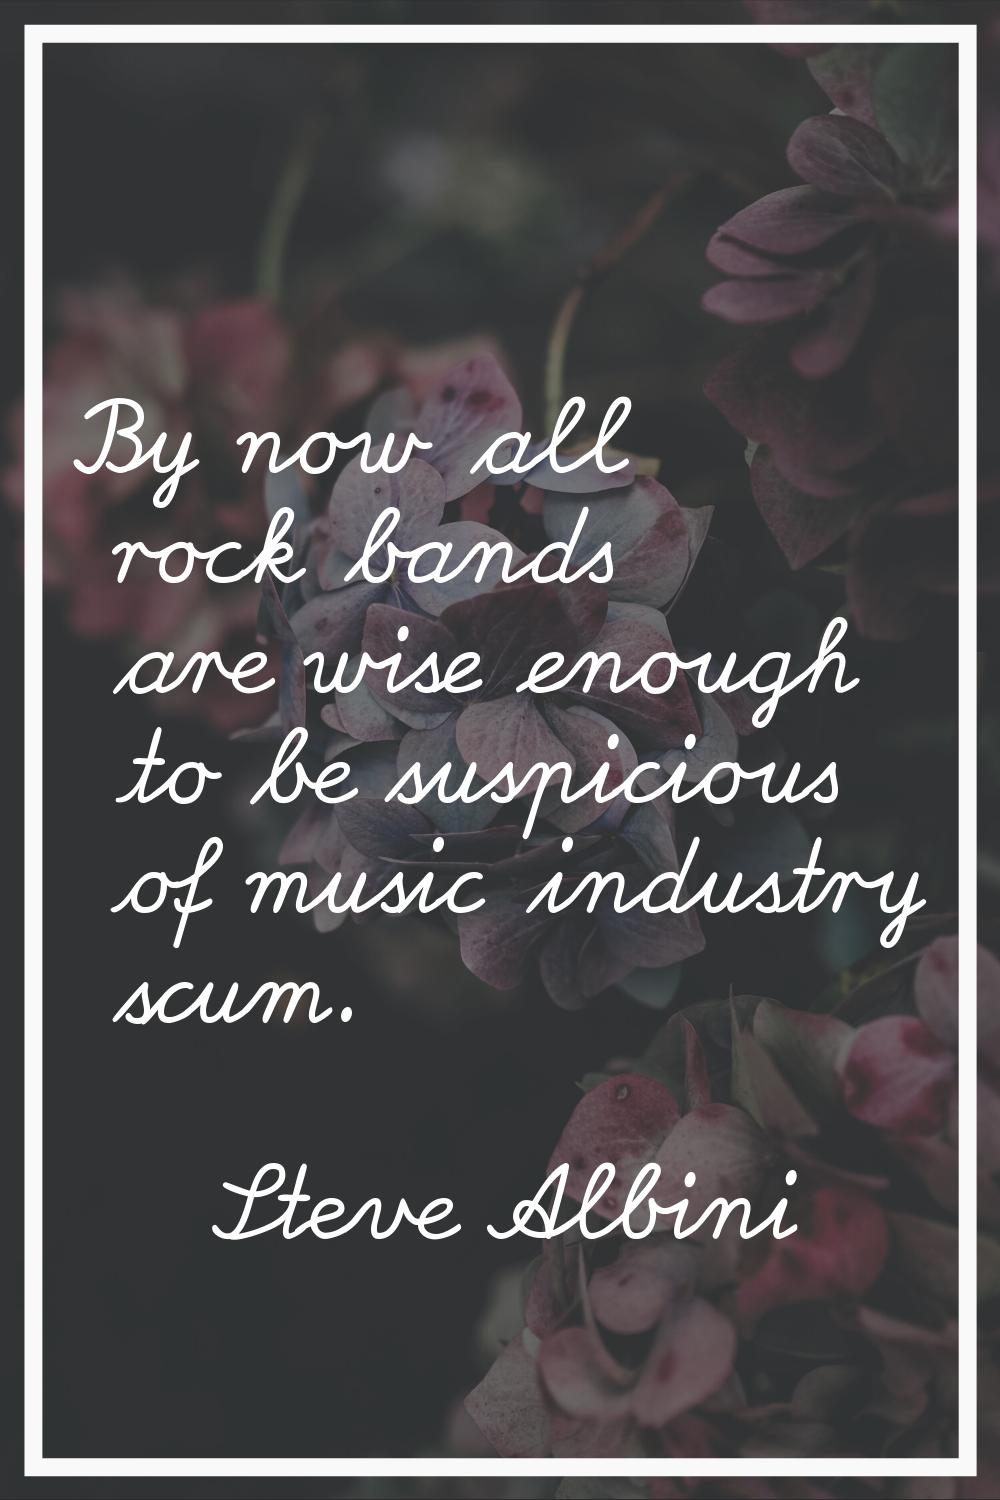 By now all rock bands are wise enough to be suspicious of music industry scum.